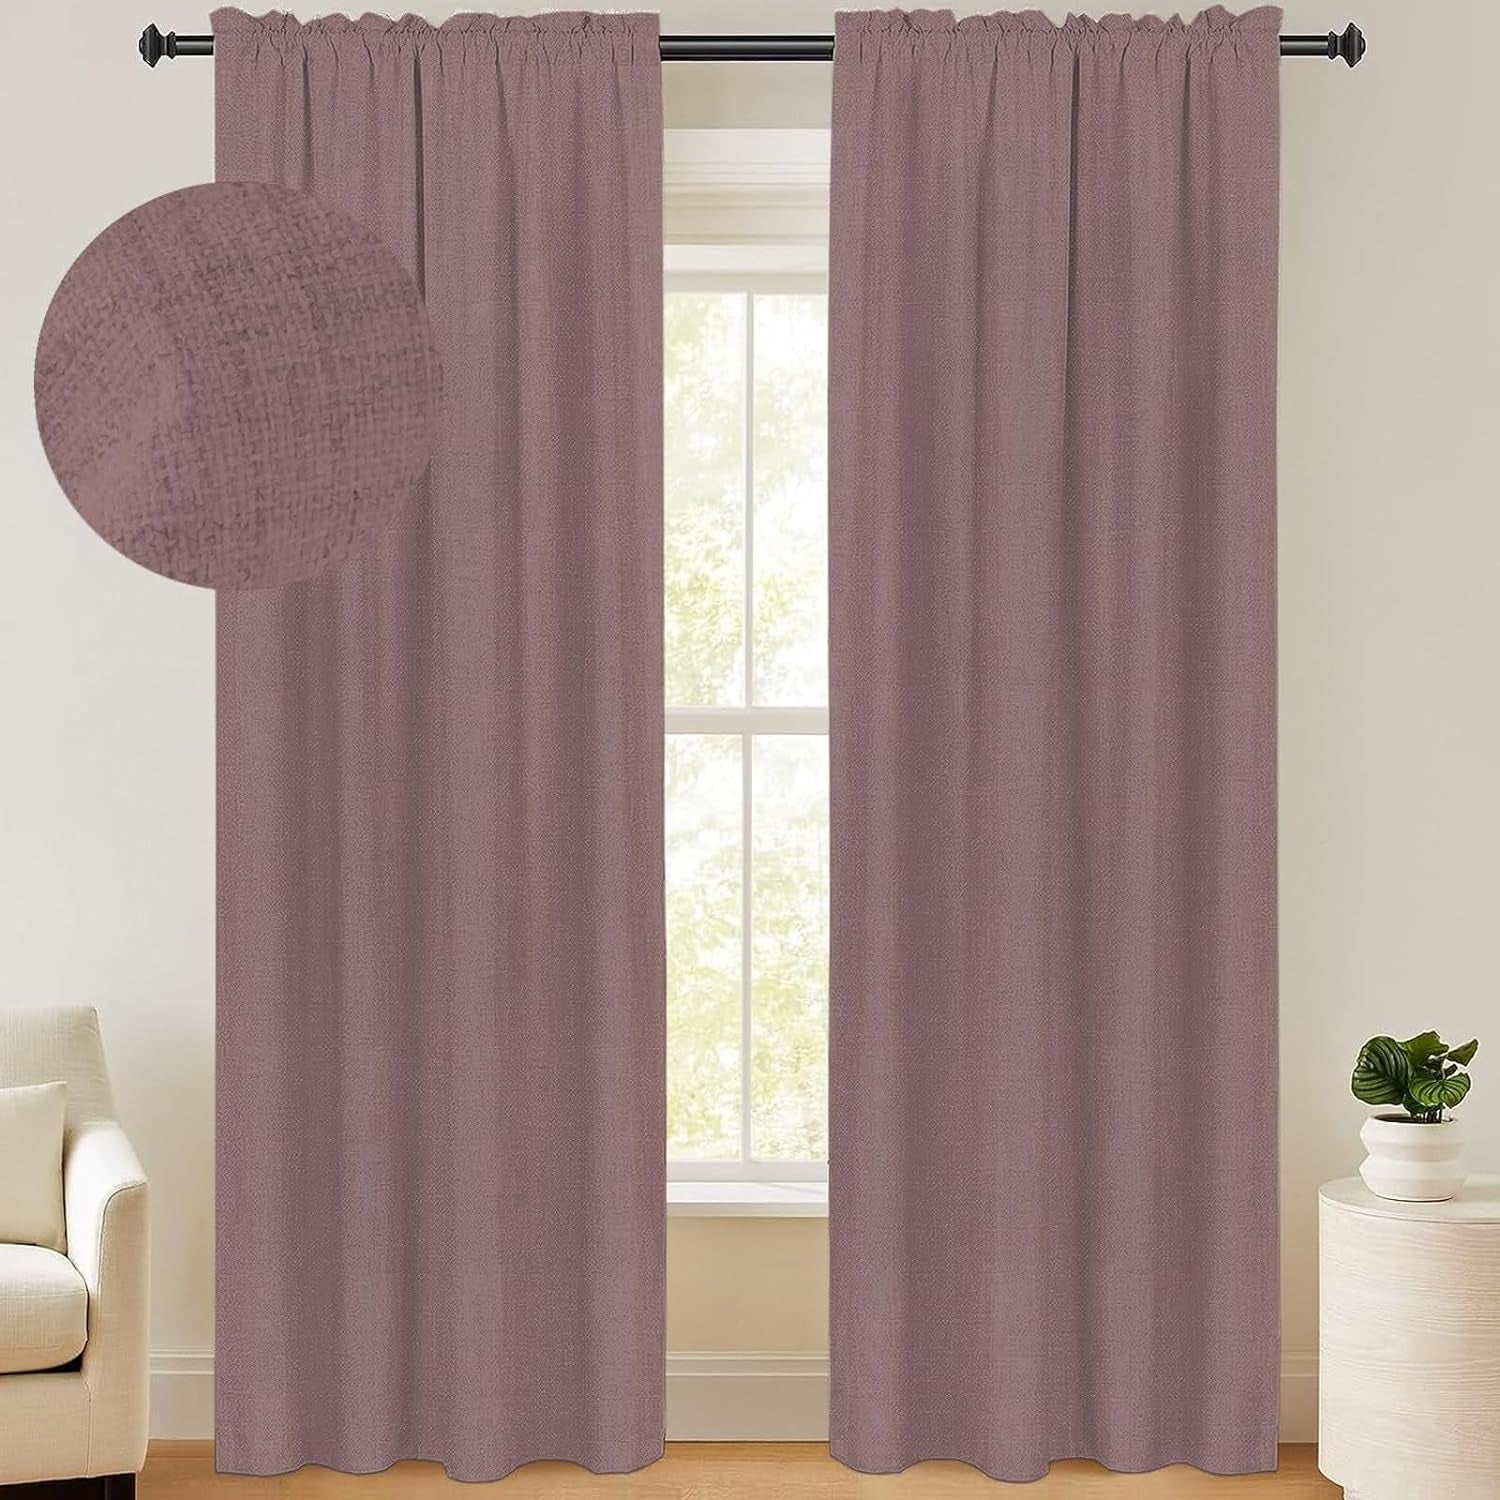 100% Blackout Shield Linen Blackout Curtains 96 Inches Long 2 Panels Set, Blackout Curtains for Bedroom/Living Room, Thermal Insulated Rod Pocket Window Curtains & Drapes, 50W X 96L, Oatmeal  100% Blackout Shield 21 Light Coral 50''W X 72''L 